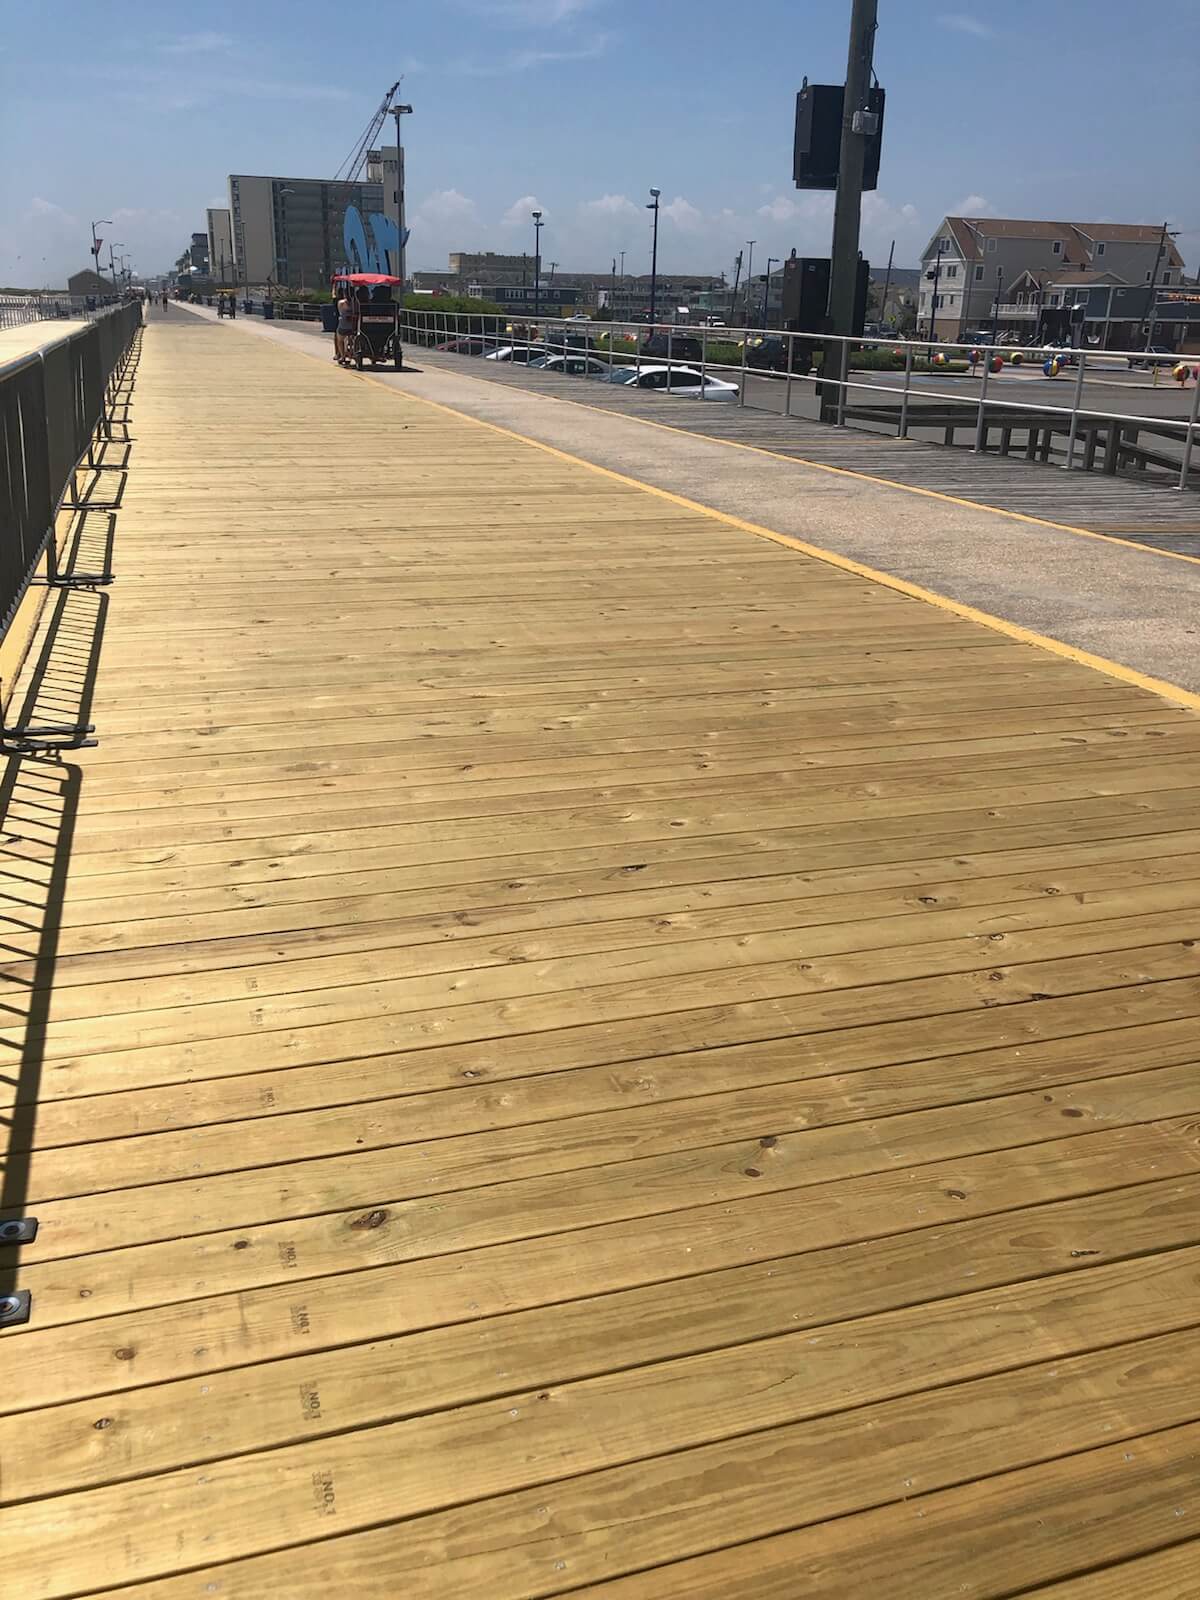 A section of the Wildwoods Boardwalk suffered storm damage April 13